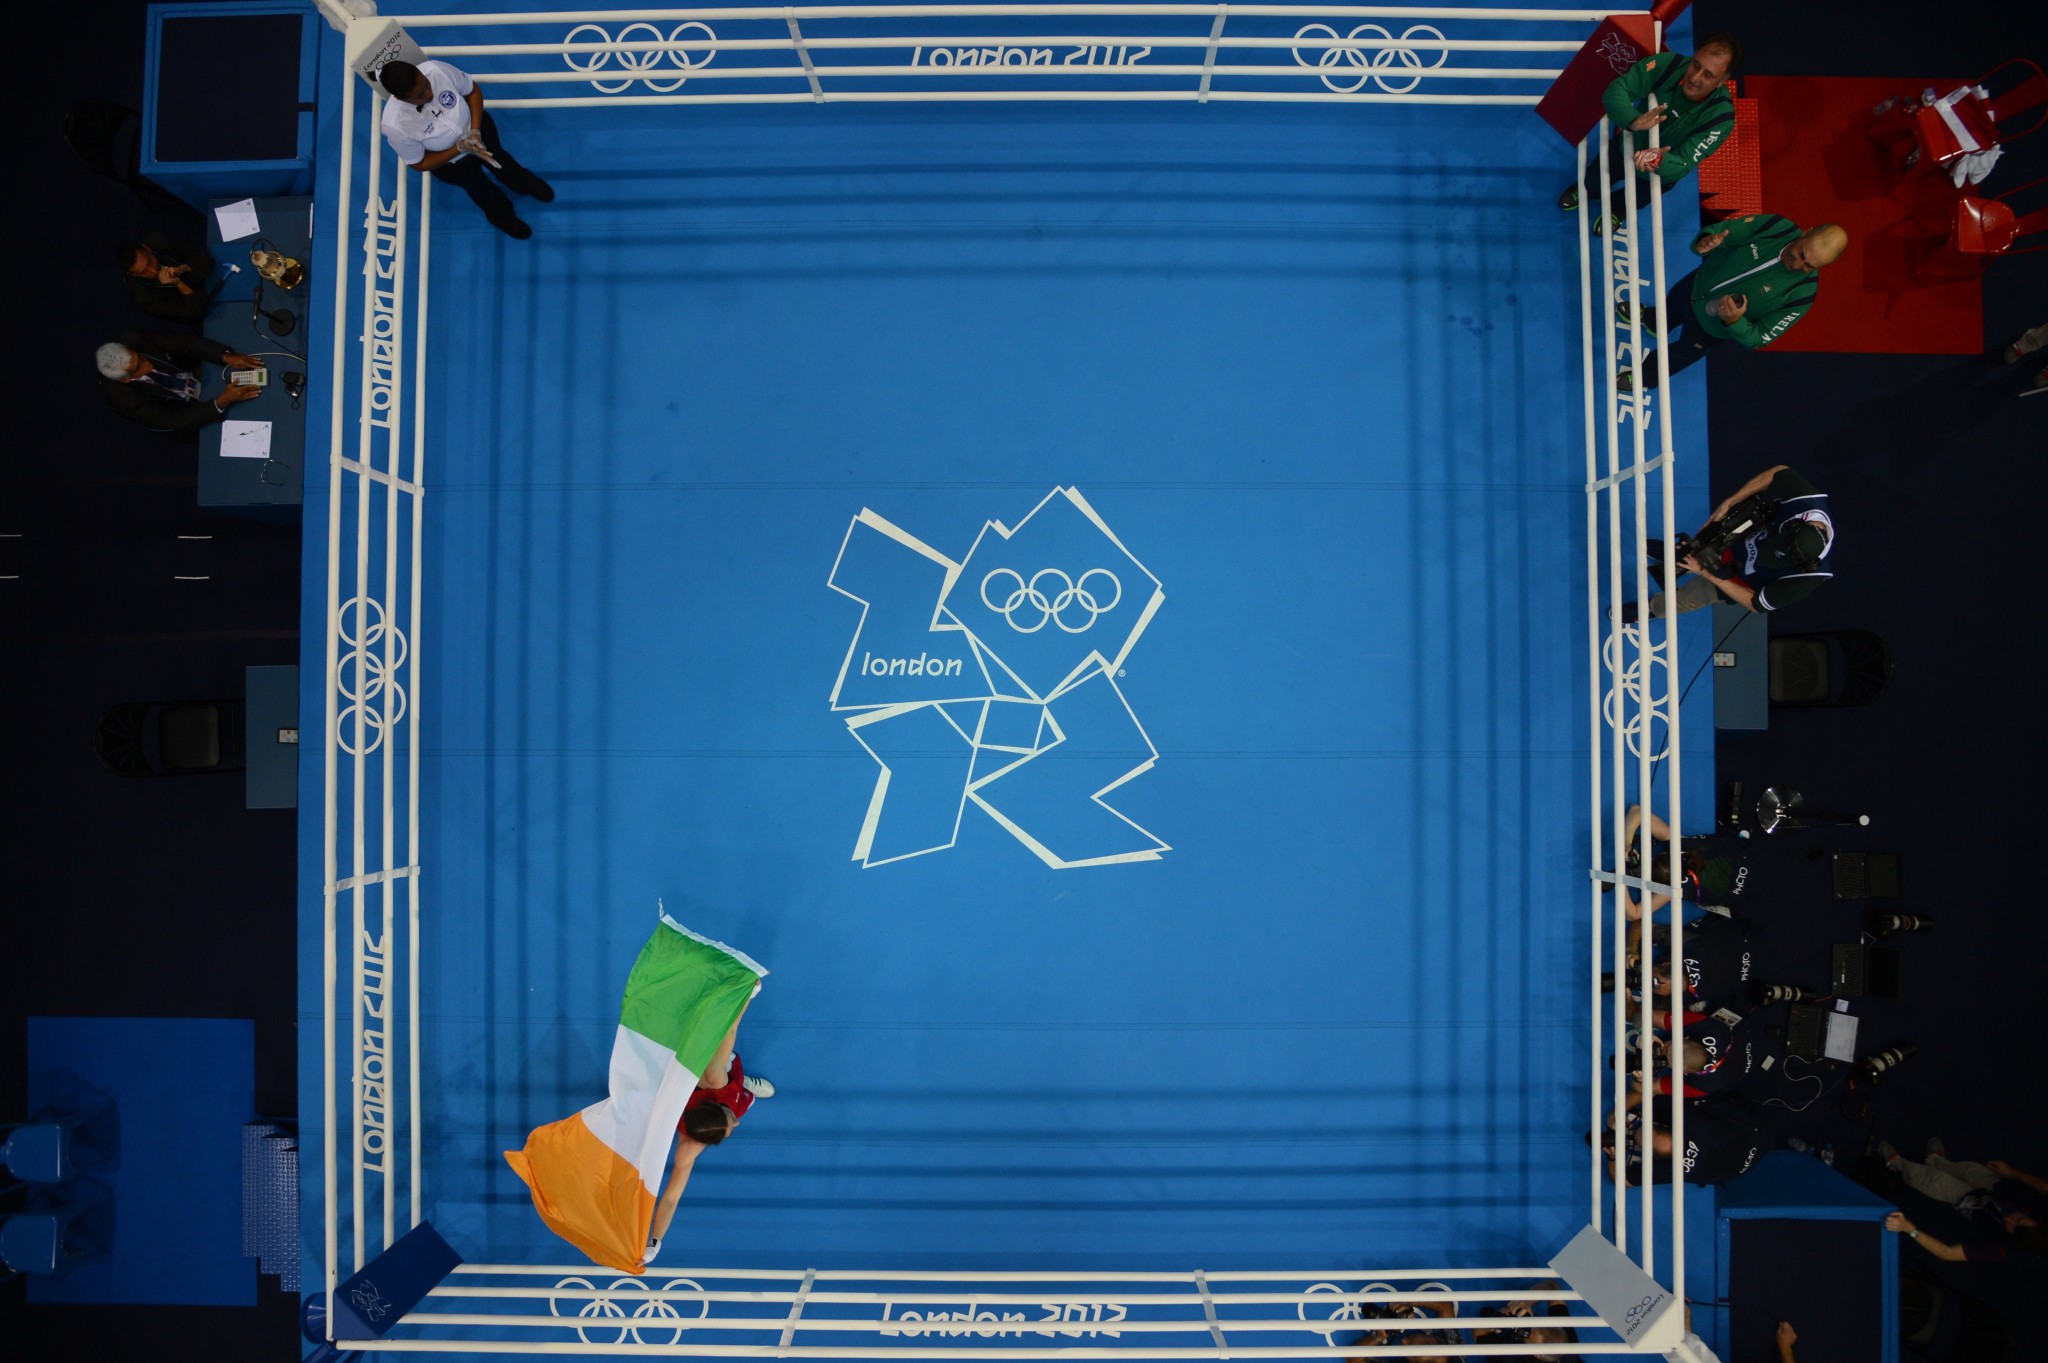 Ireland has won more Olympic medals in boxing than any other sport ©Getty mages